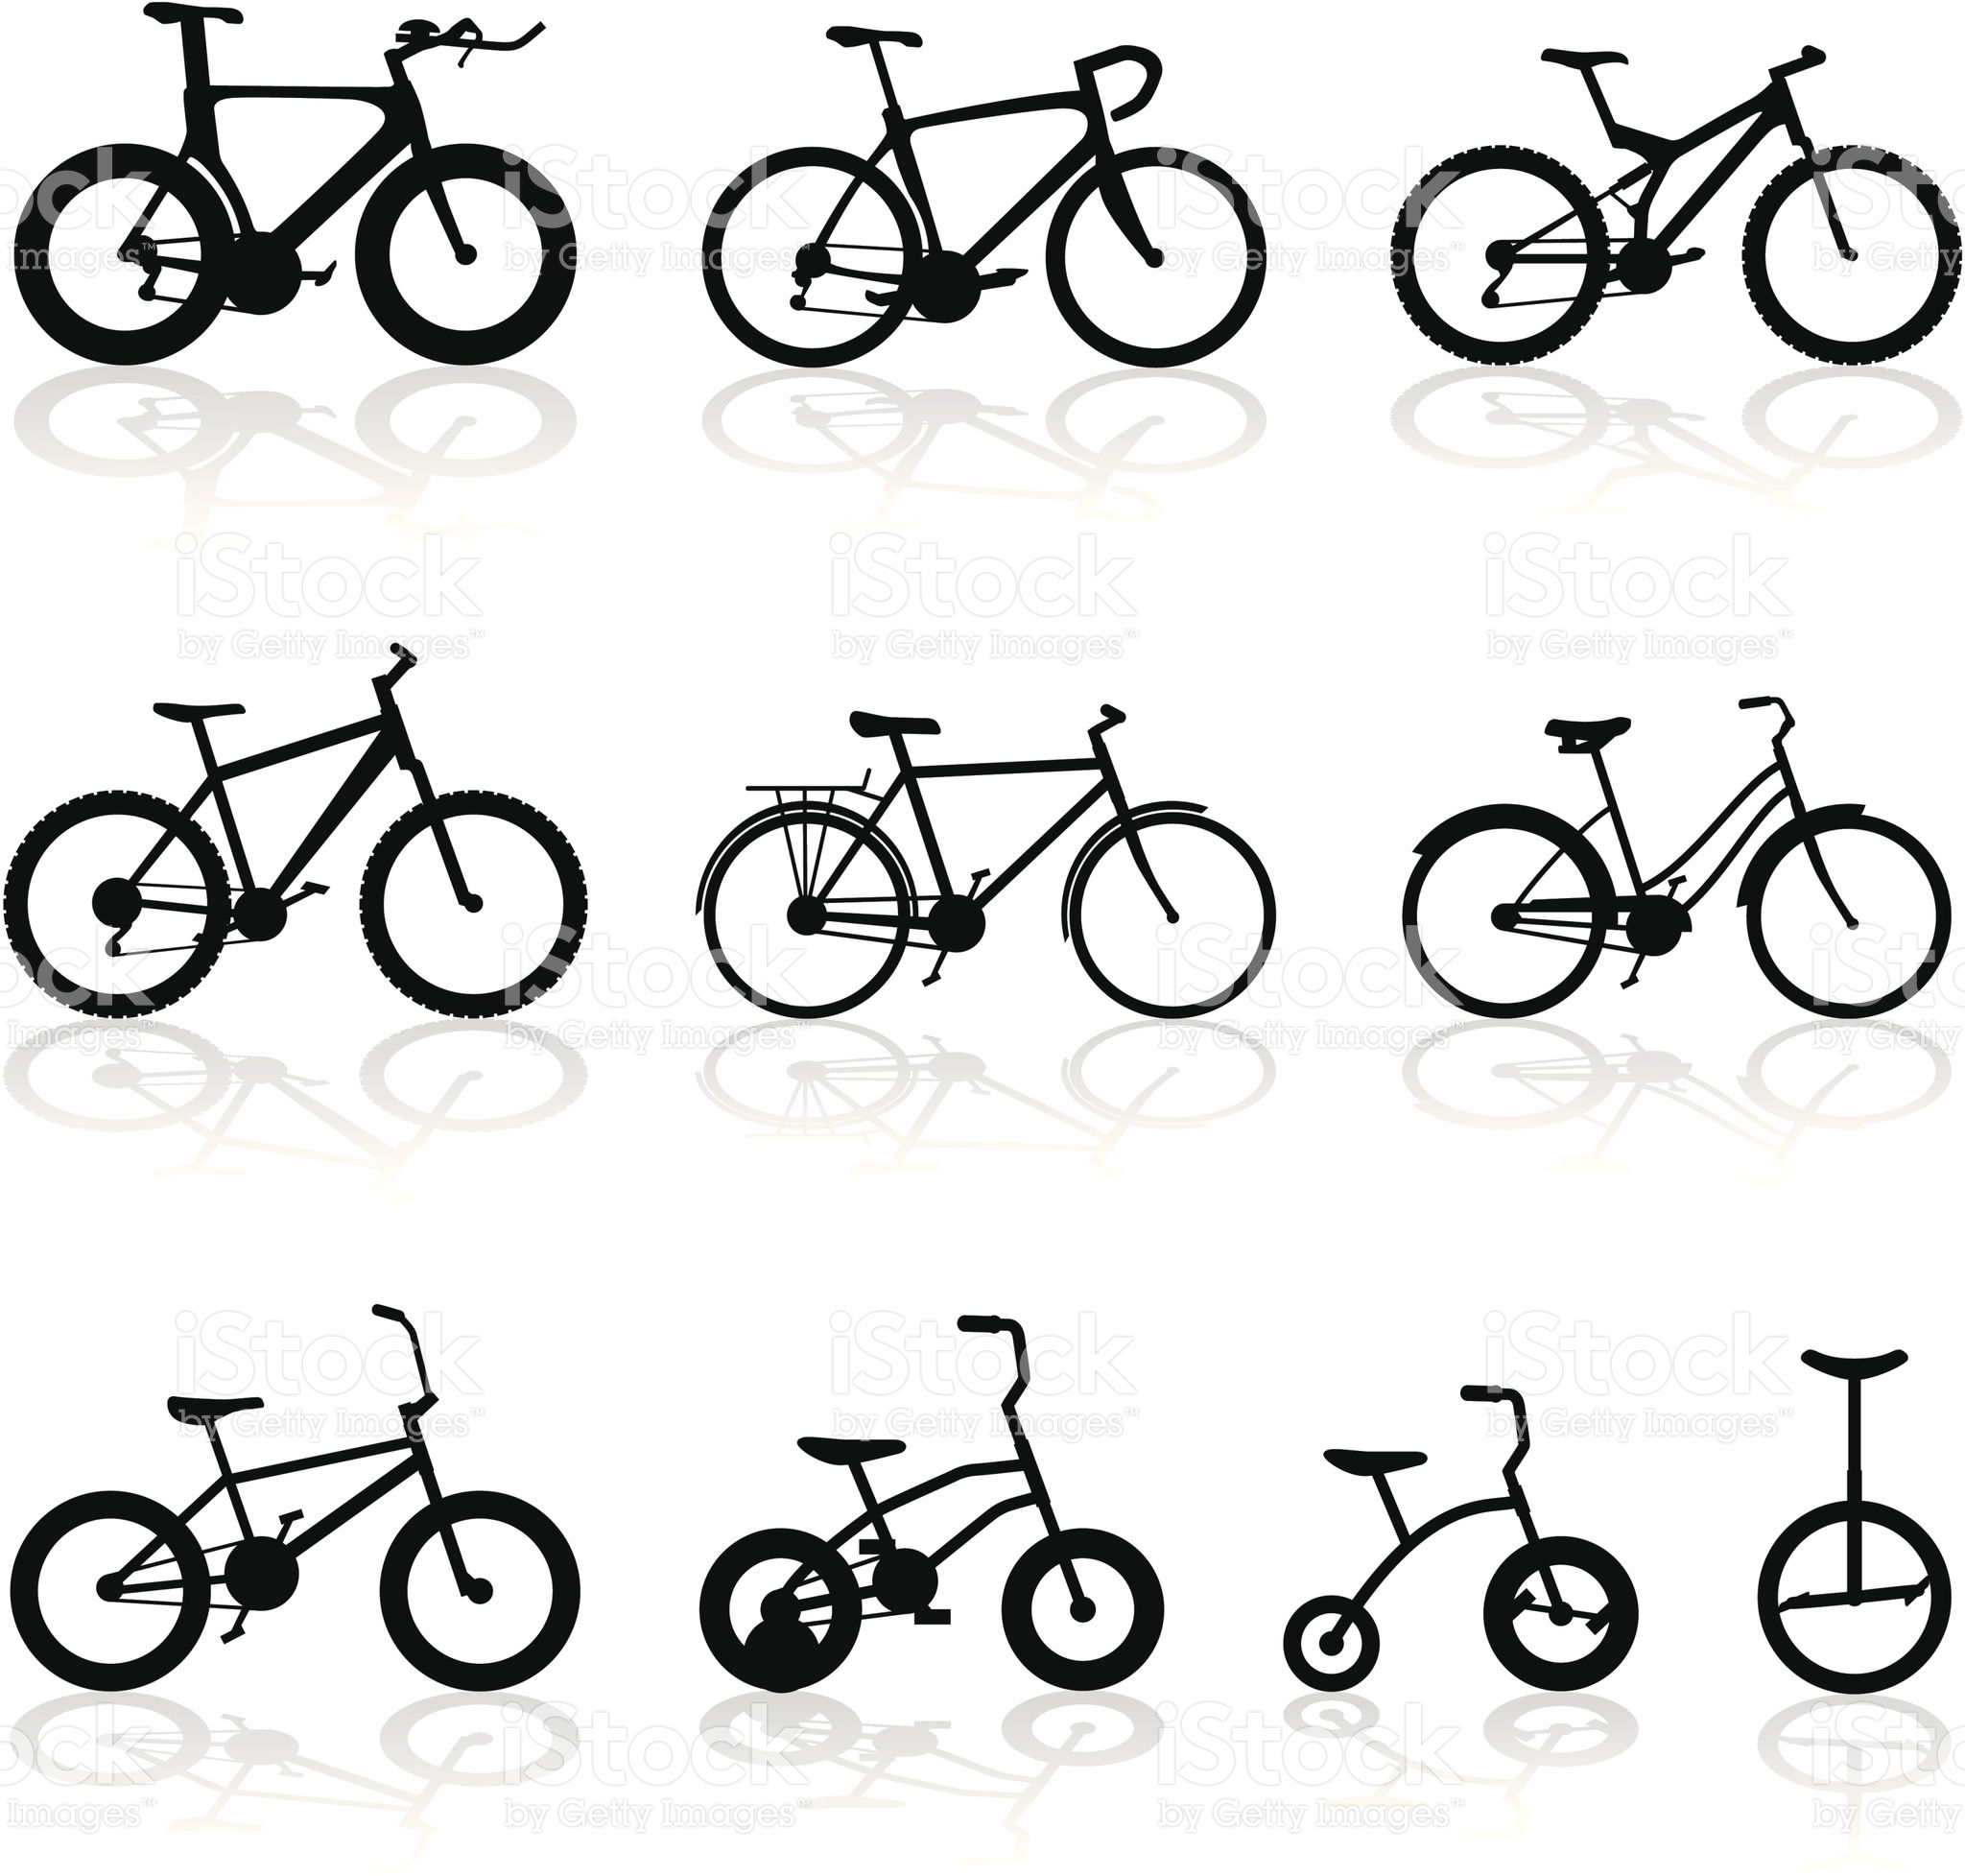 all-kinds-of-bikes-vector-id165691764?s=2048x2048